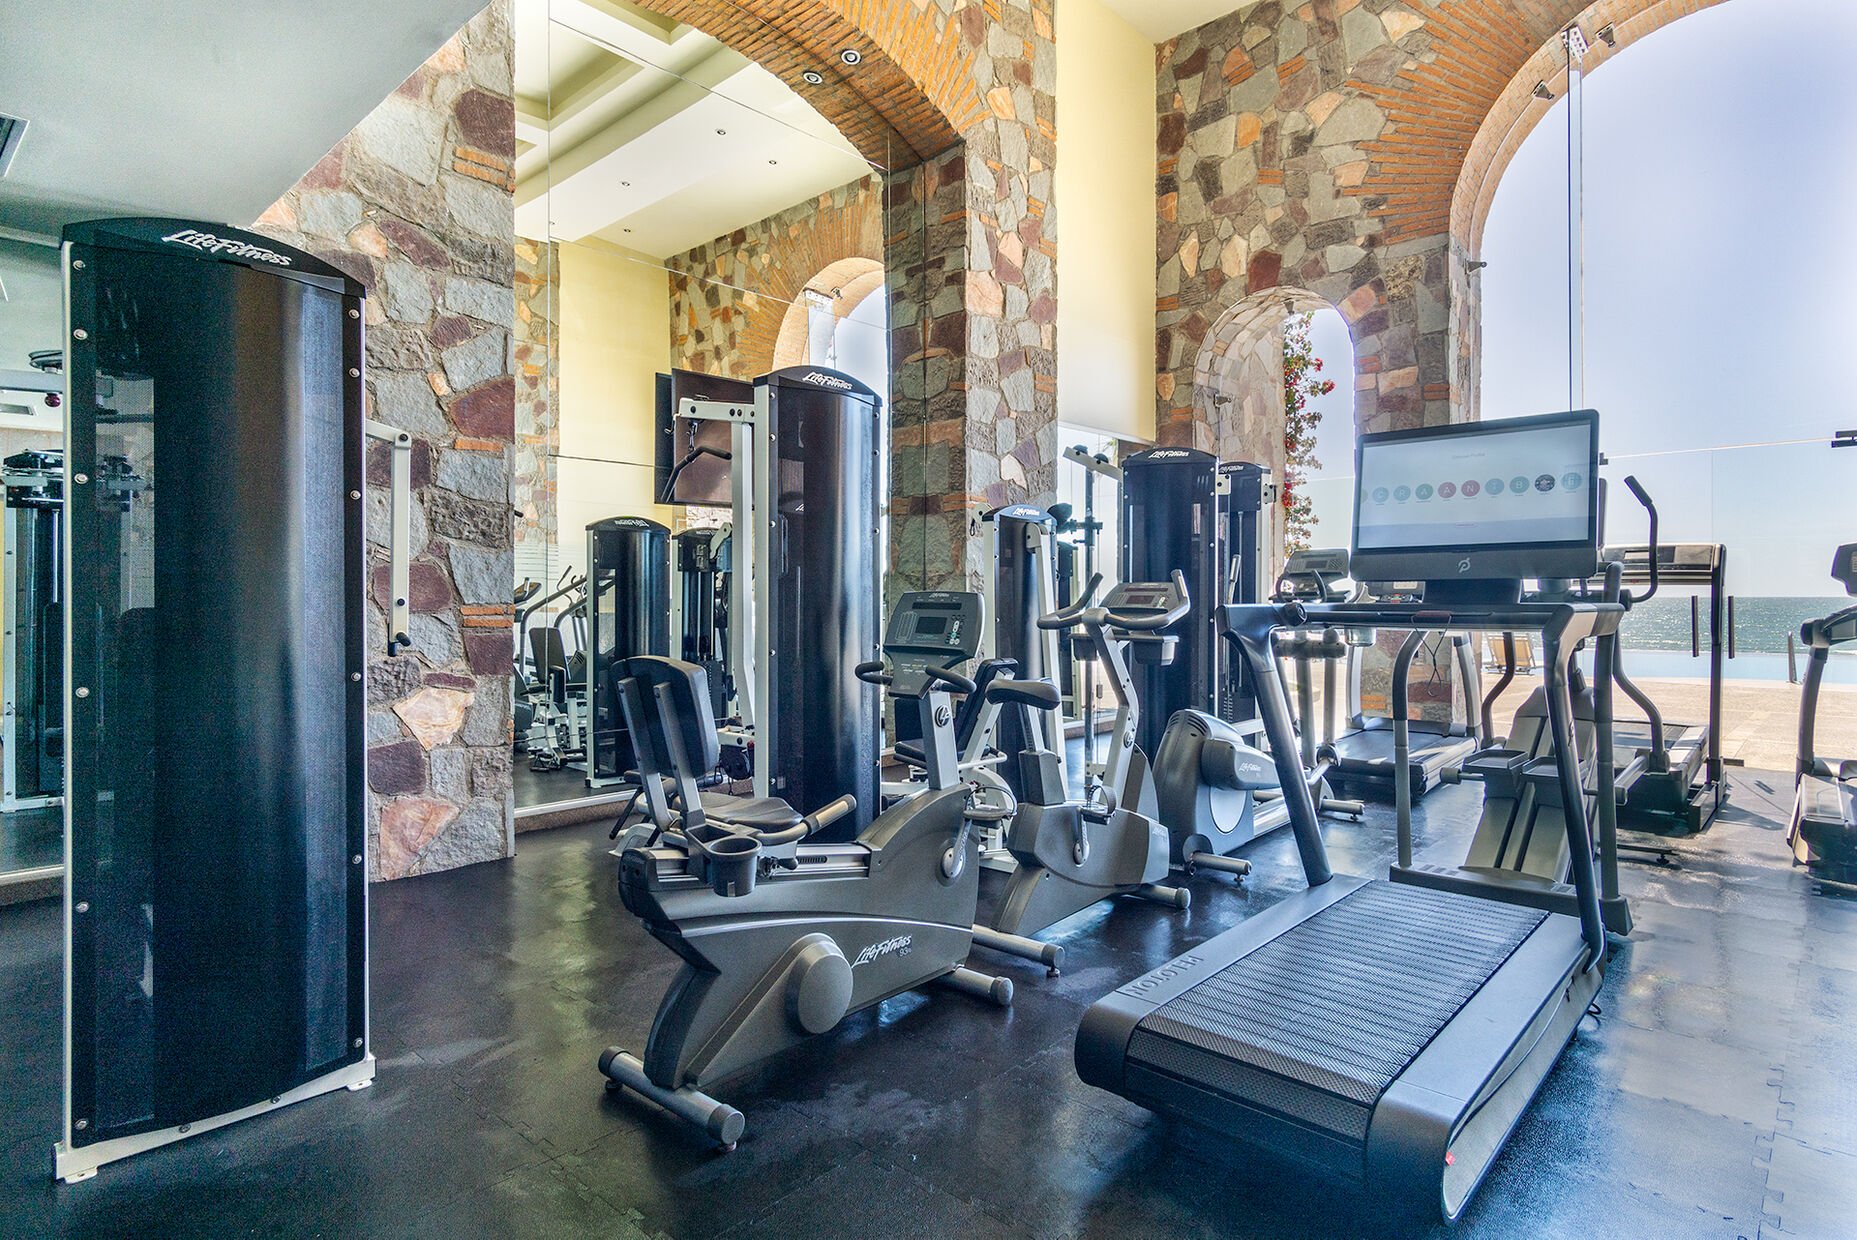 The gym has tall arch d windows that bring the ocean inside as you workout!